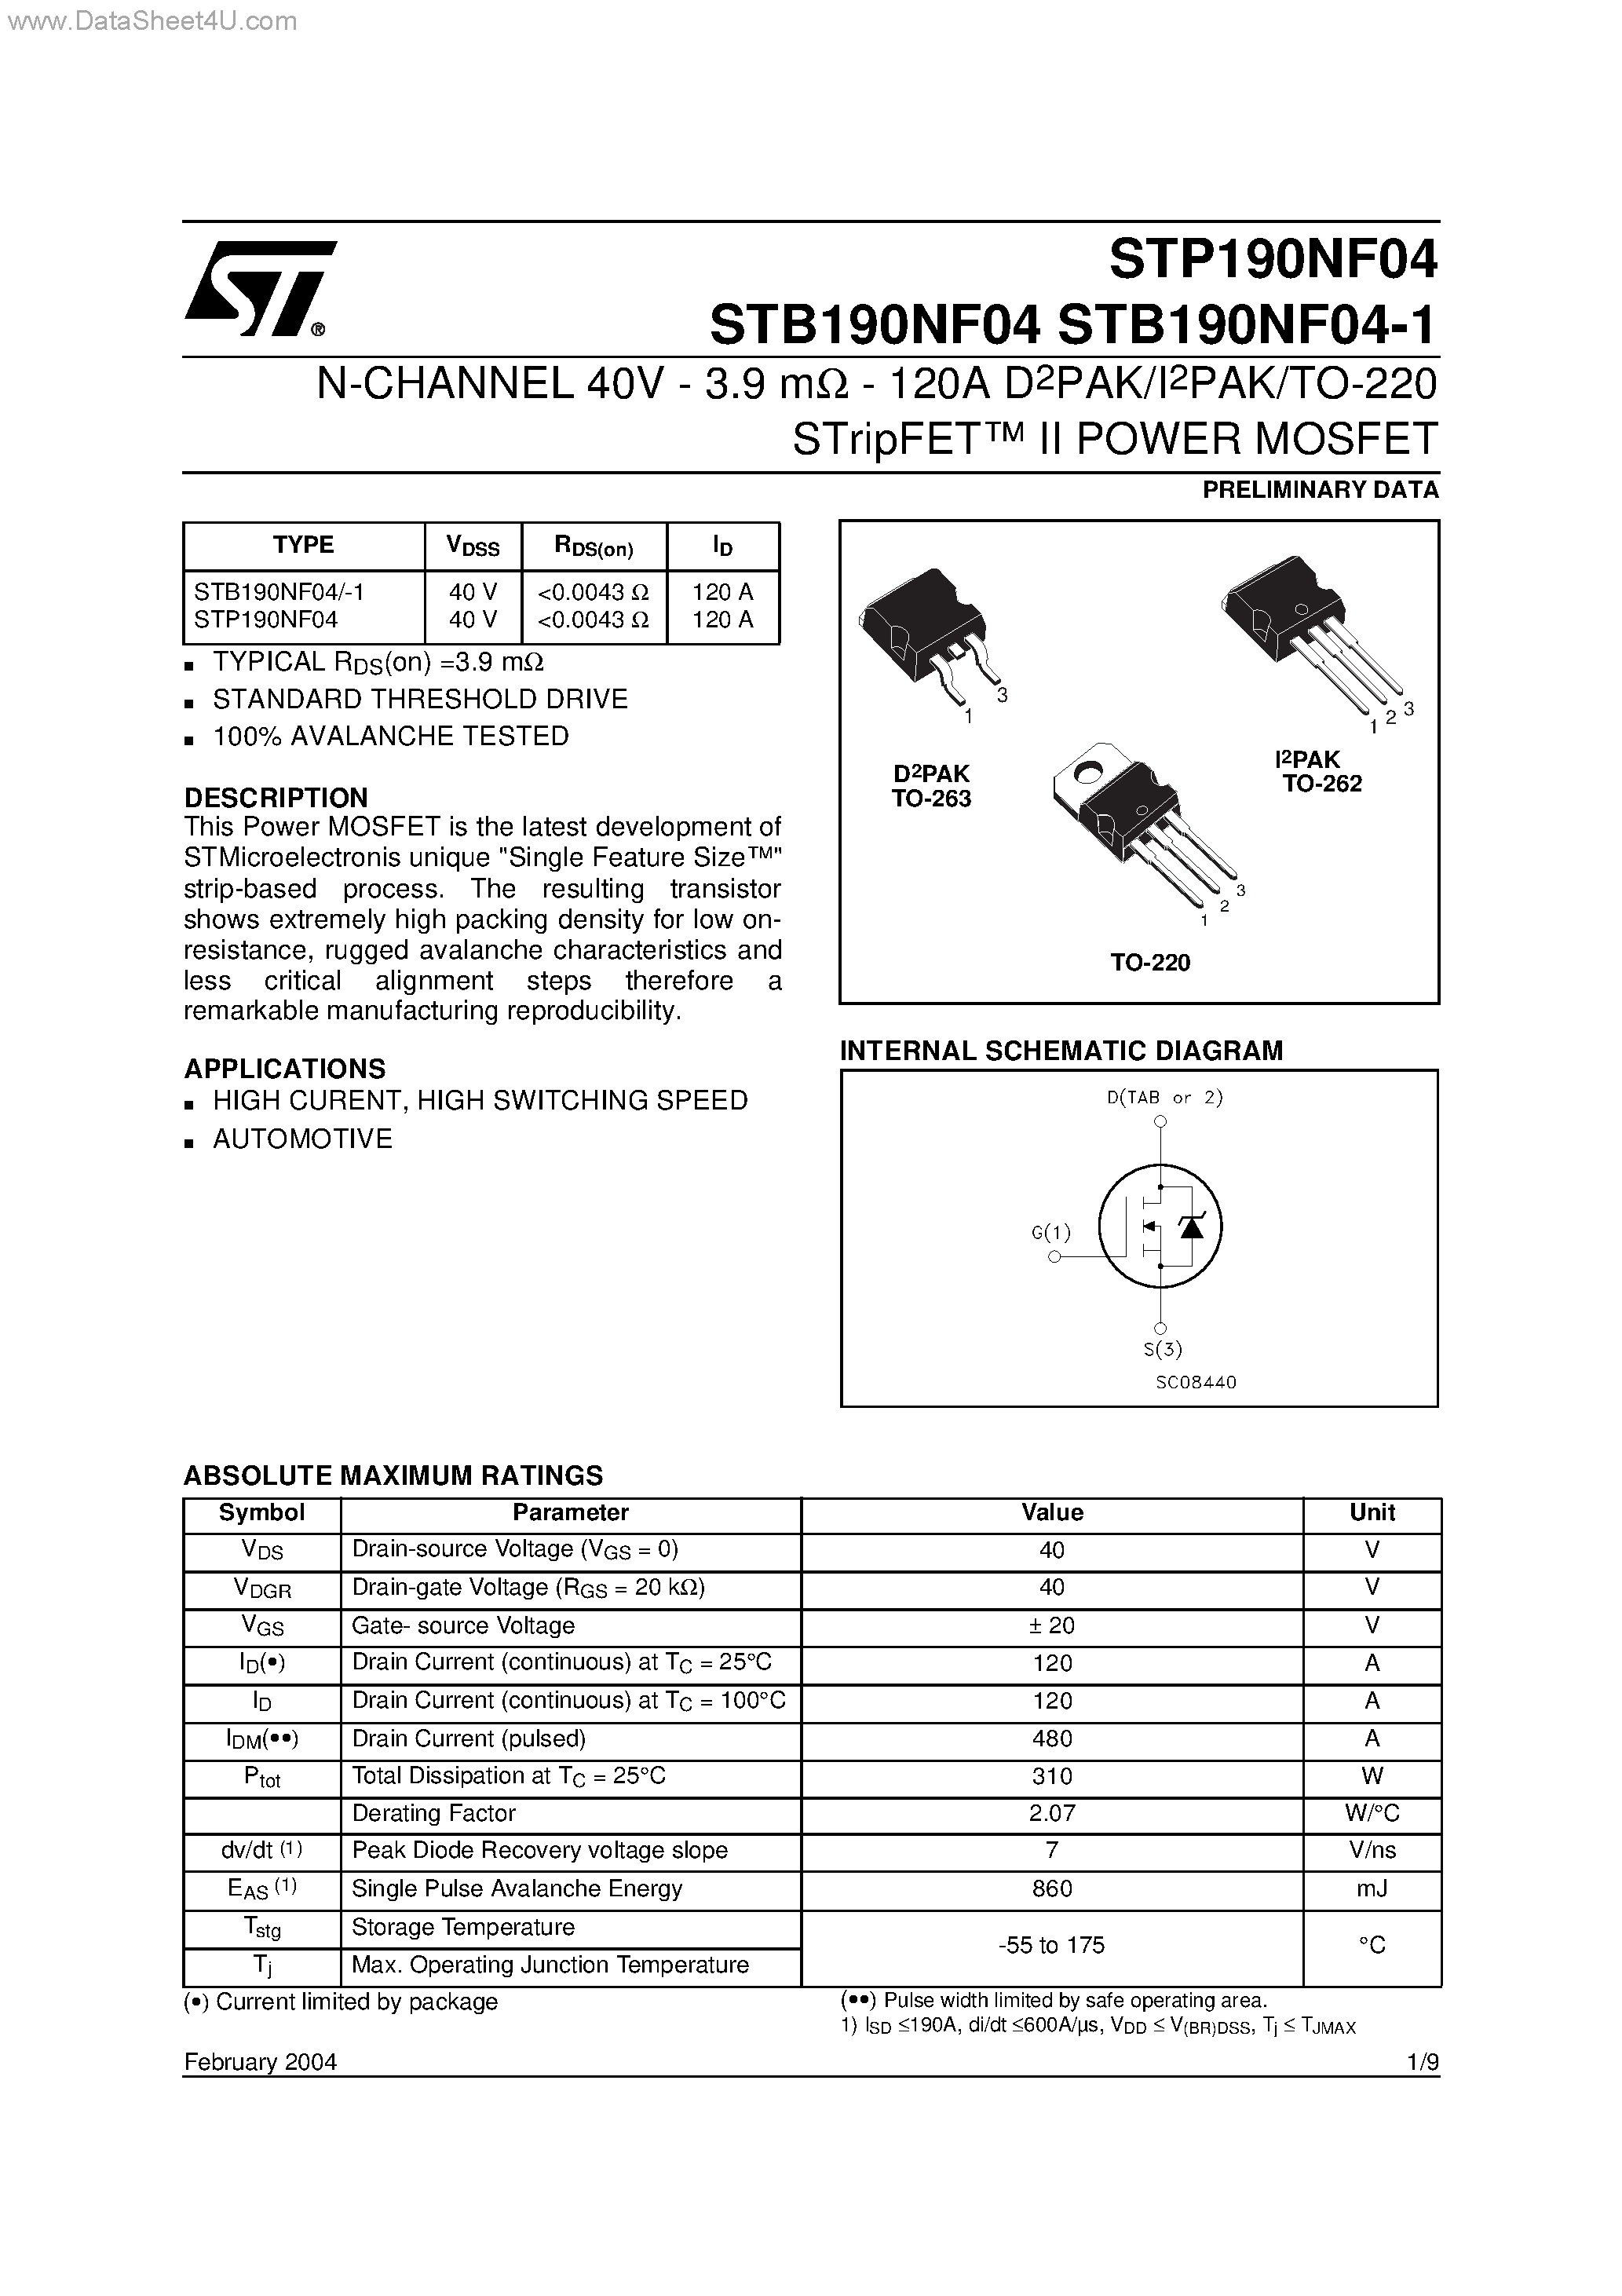 Datasheet STP190NF04 - N-CHANNEL POWER MOSFET page 1